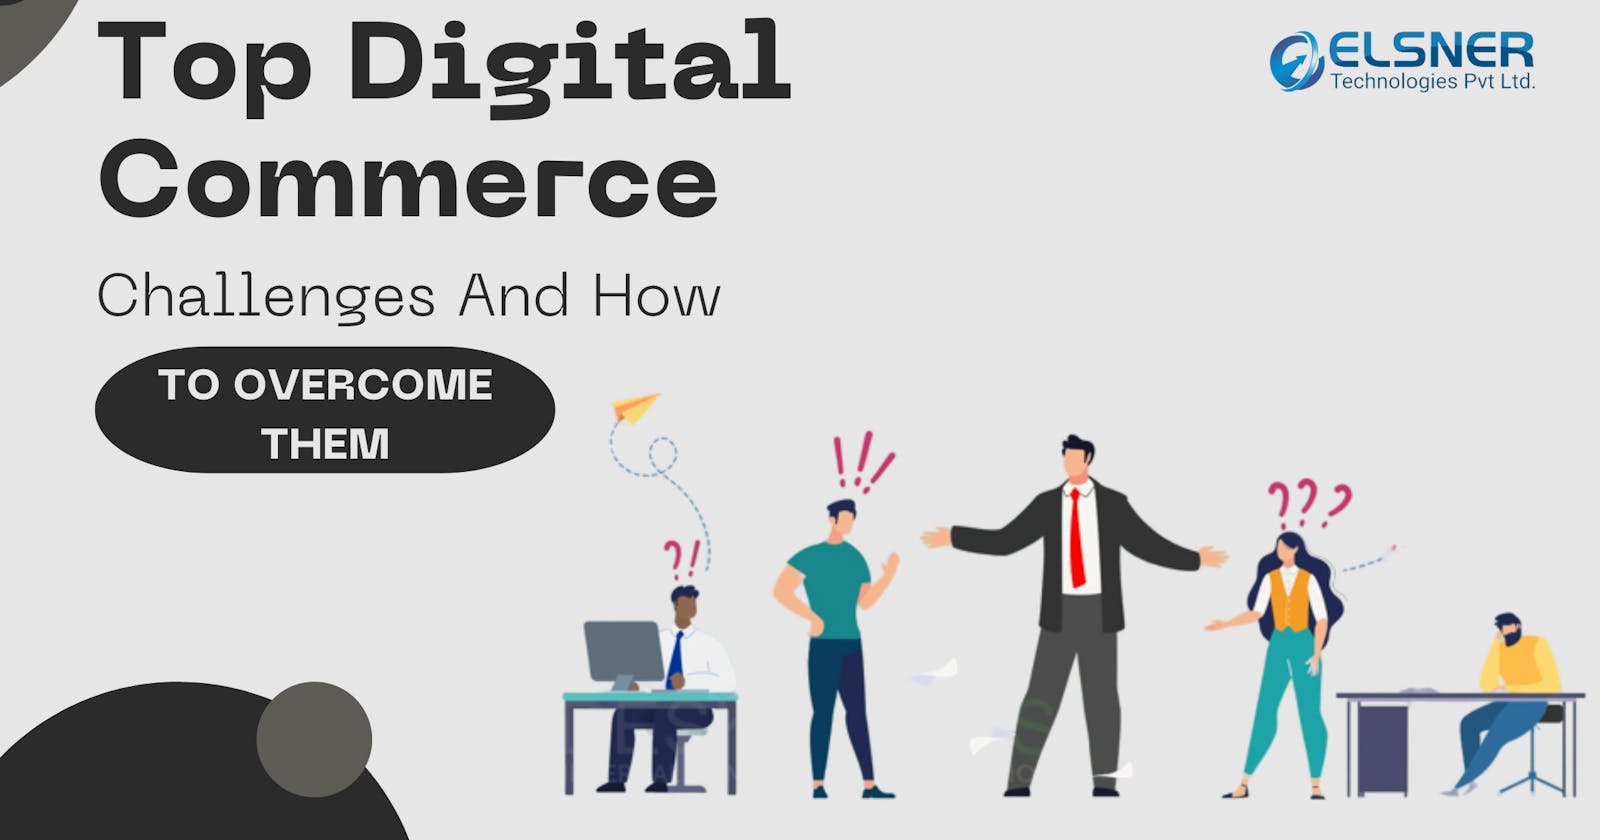 Top Digital Commerce Challenges And How To Overcome Them